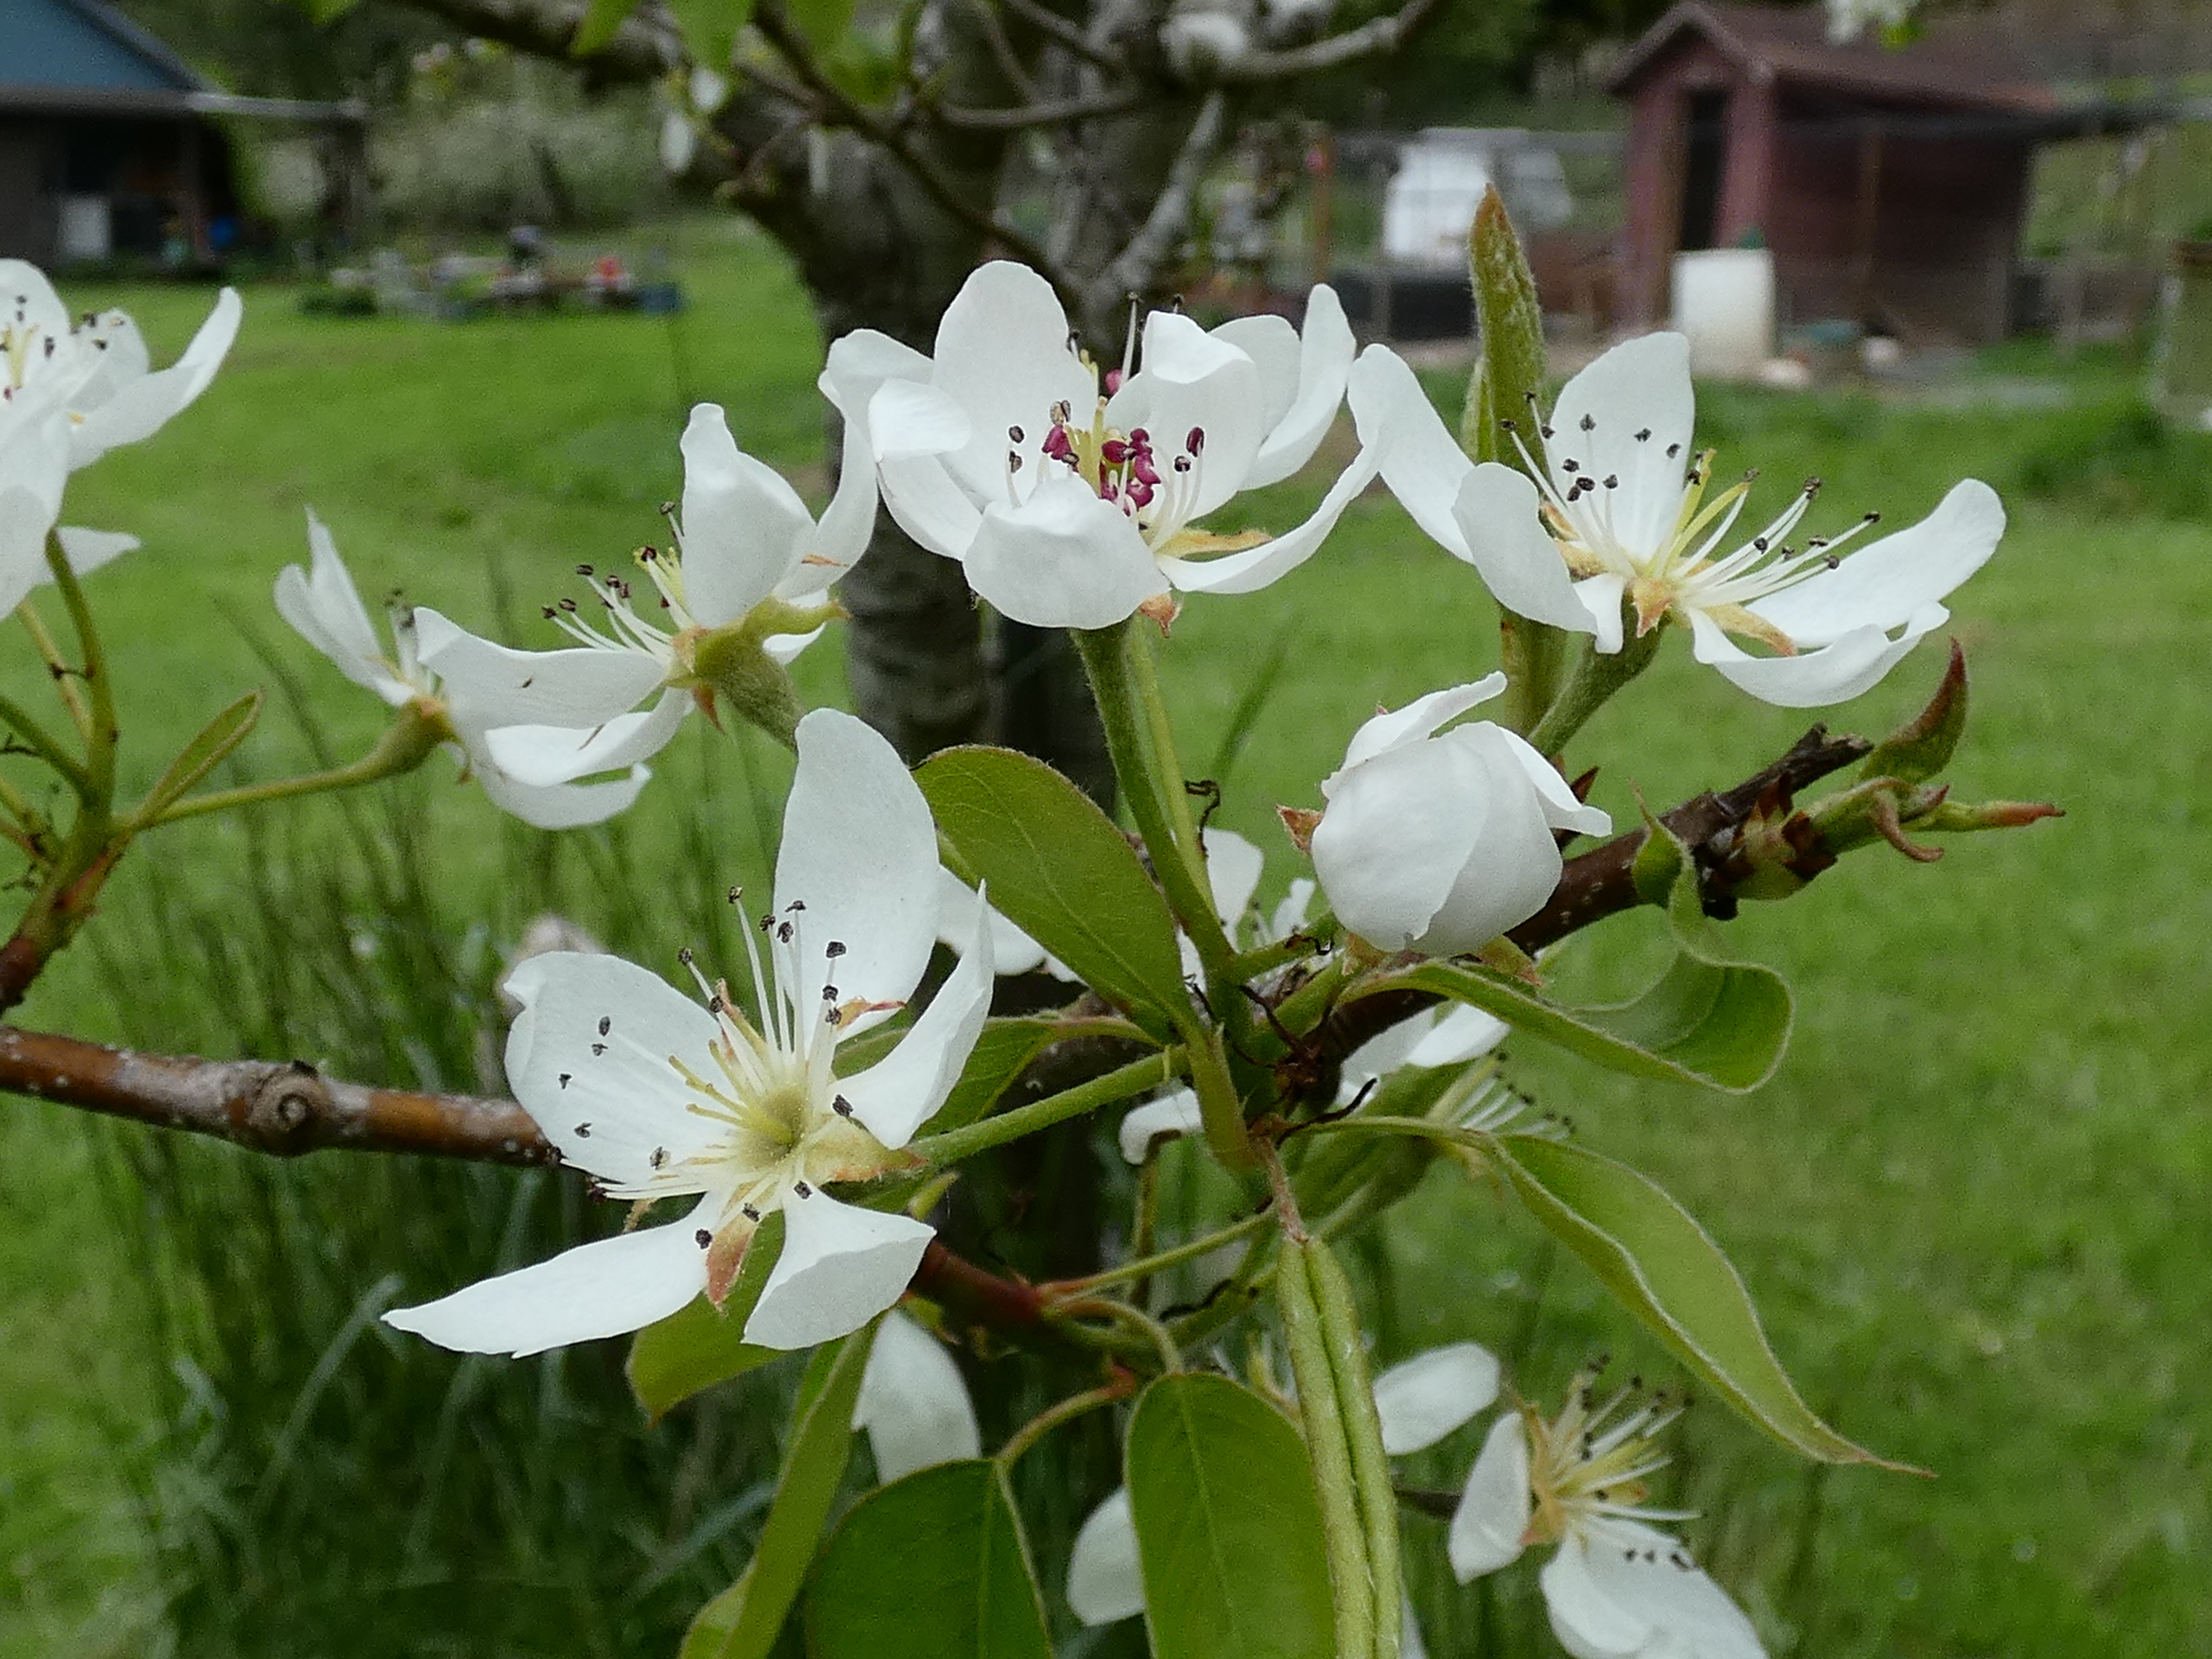 A cluster of pear blossoms